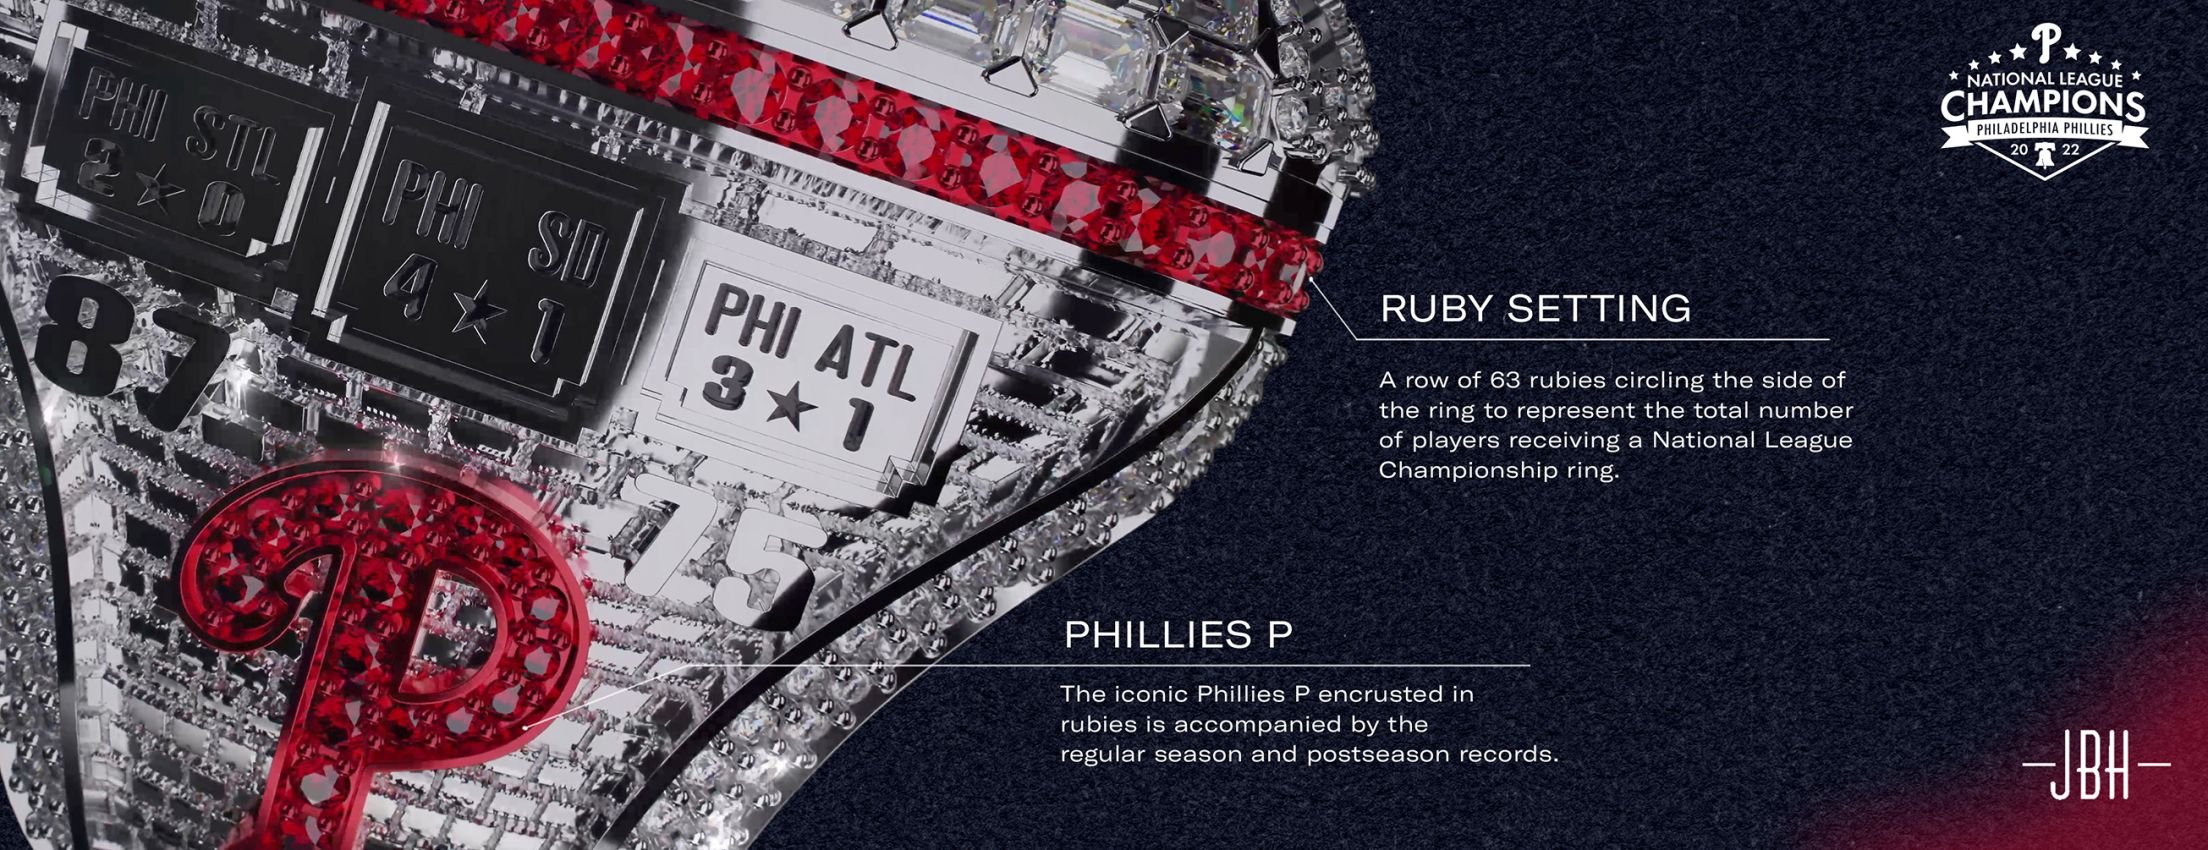 Phillies mark their 2022 National League pennant with super-sized  championship ring